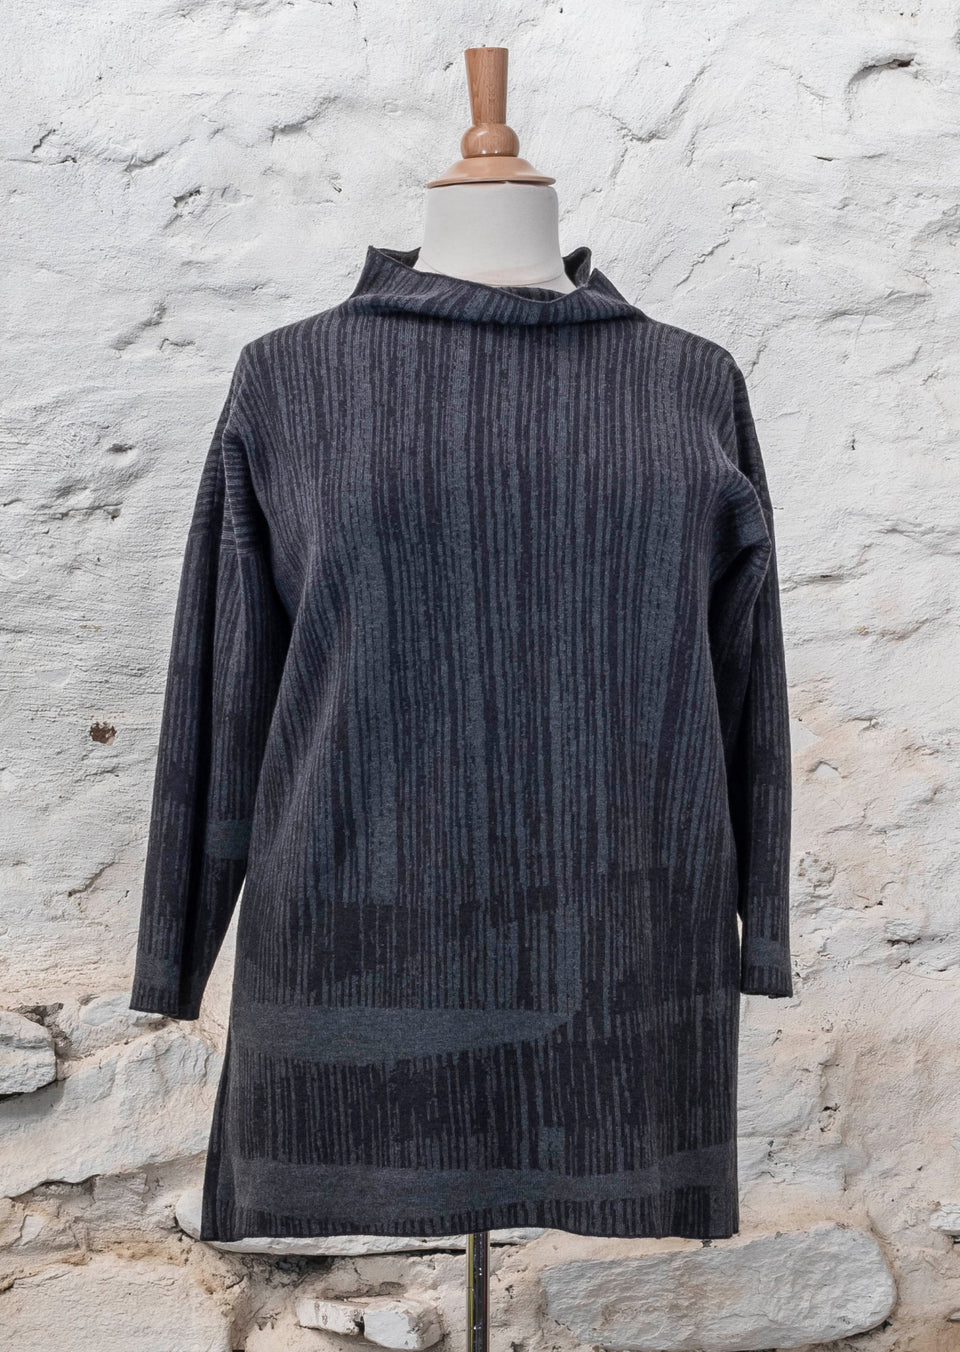 knitted inklines tunic, a straight cut longline jumper with stand-up neck. Linear, abstract design. Here shown in colourway midnight greys